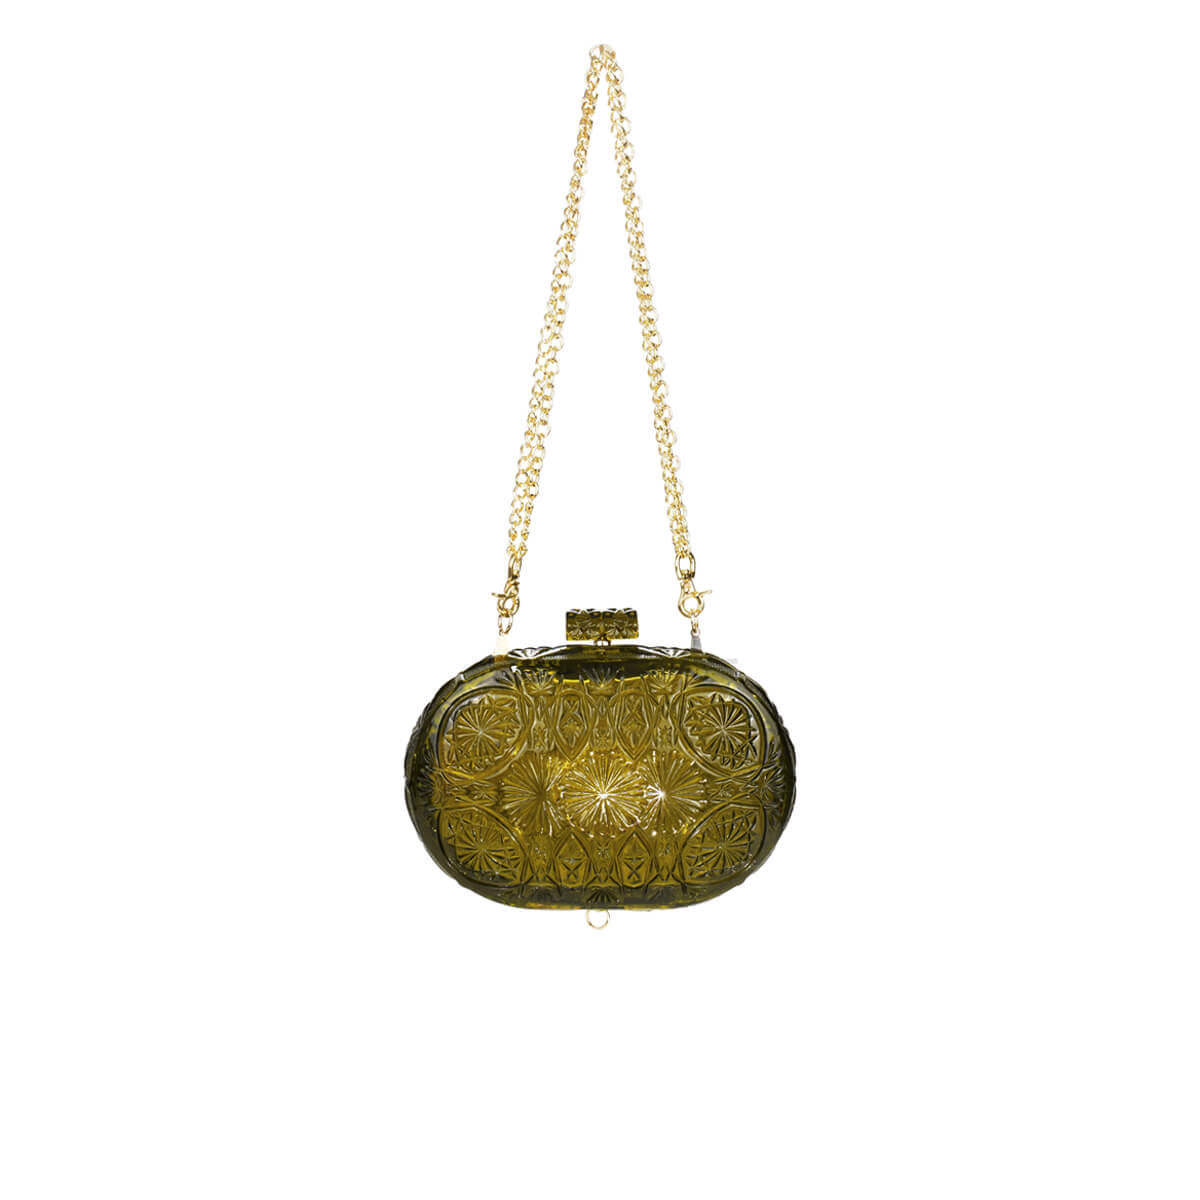 NEW IN Intricate Oval Clutch Olive